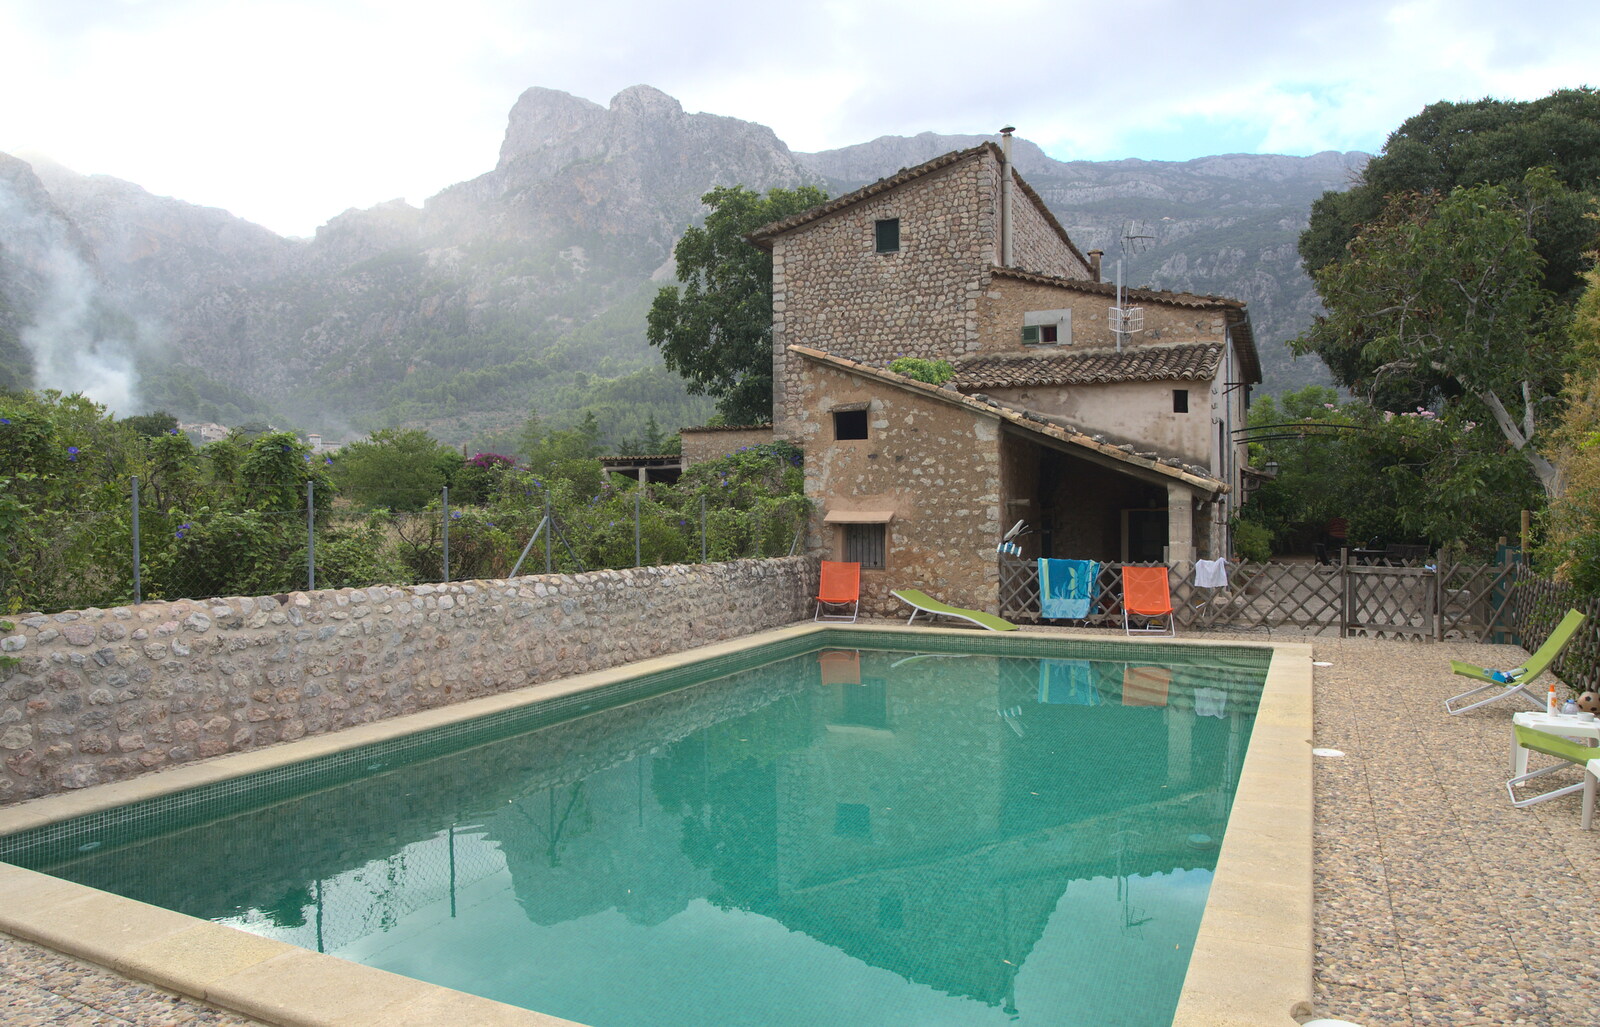 The swimming pool and house from A Few Hours in Valdemossa, Mallorca, Spain - 13th September 2012